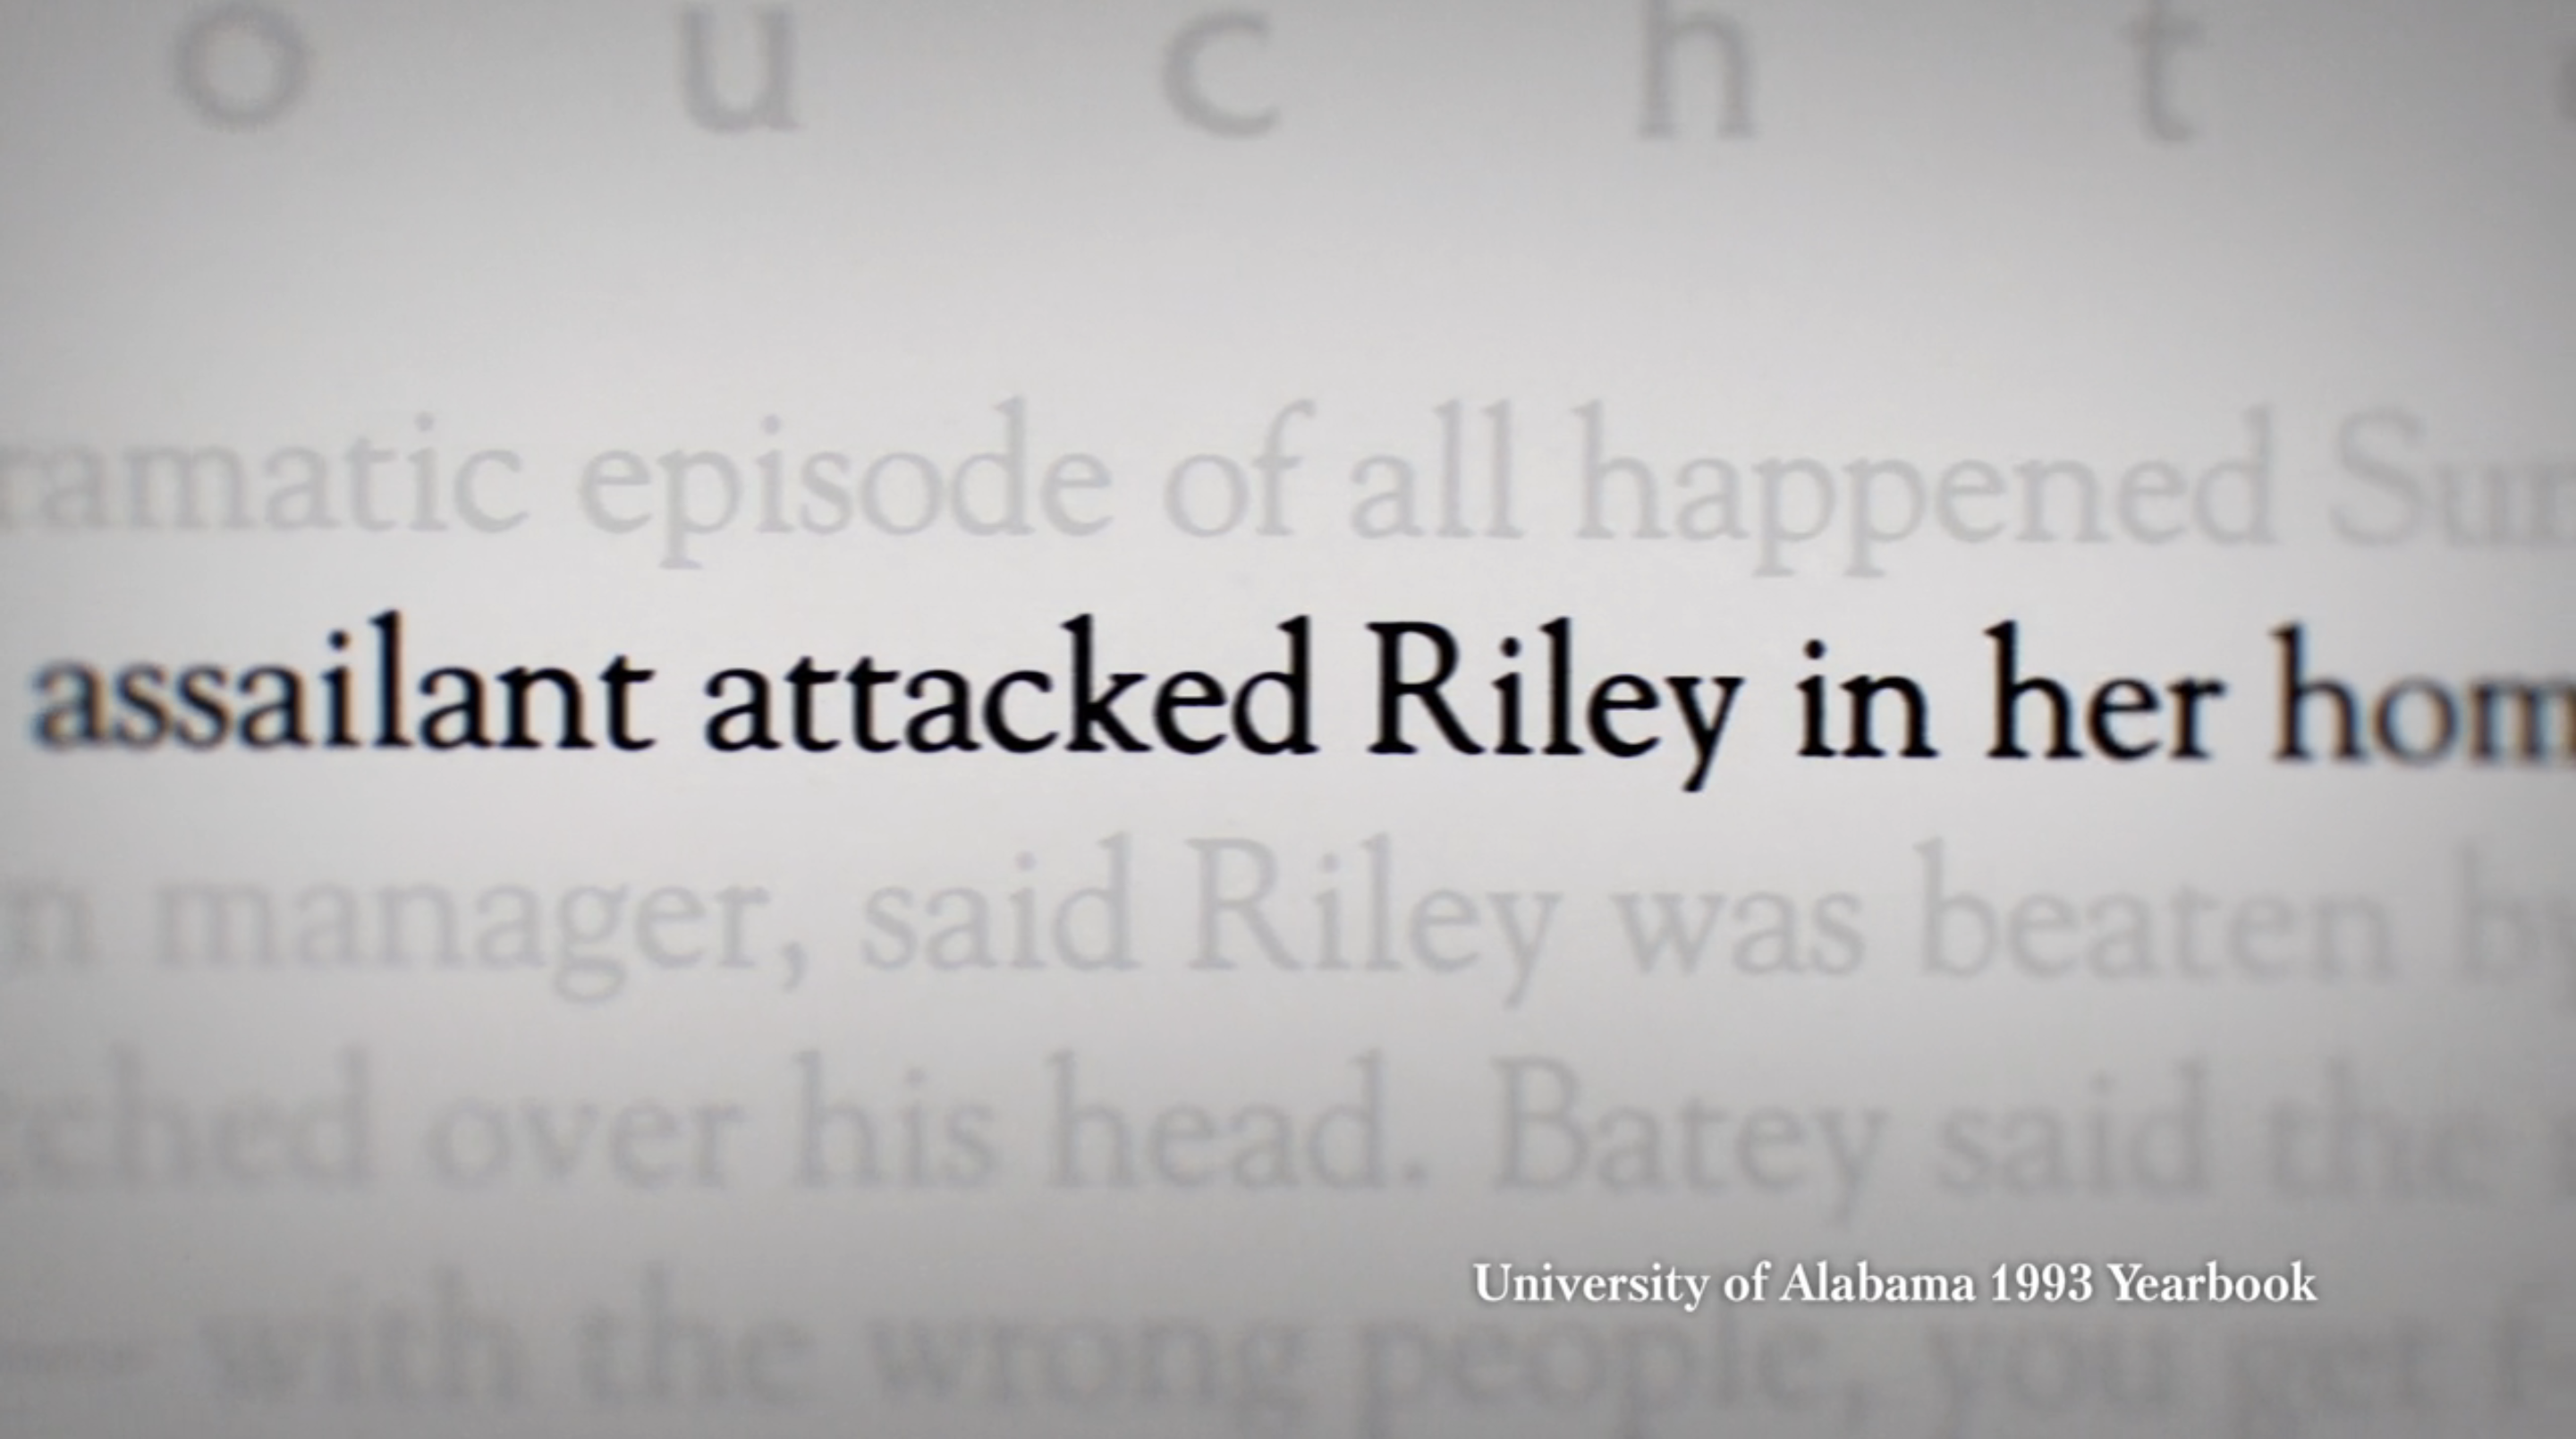 &quot;assailant attacked Riley in her home&quot;